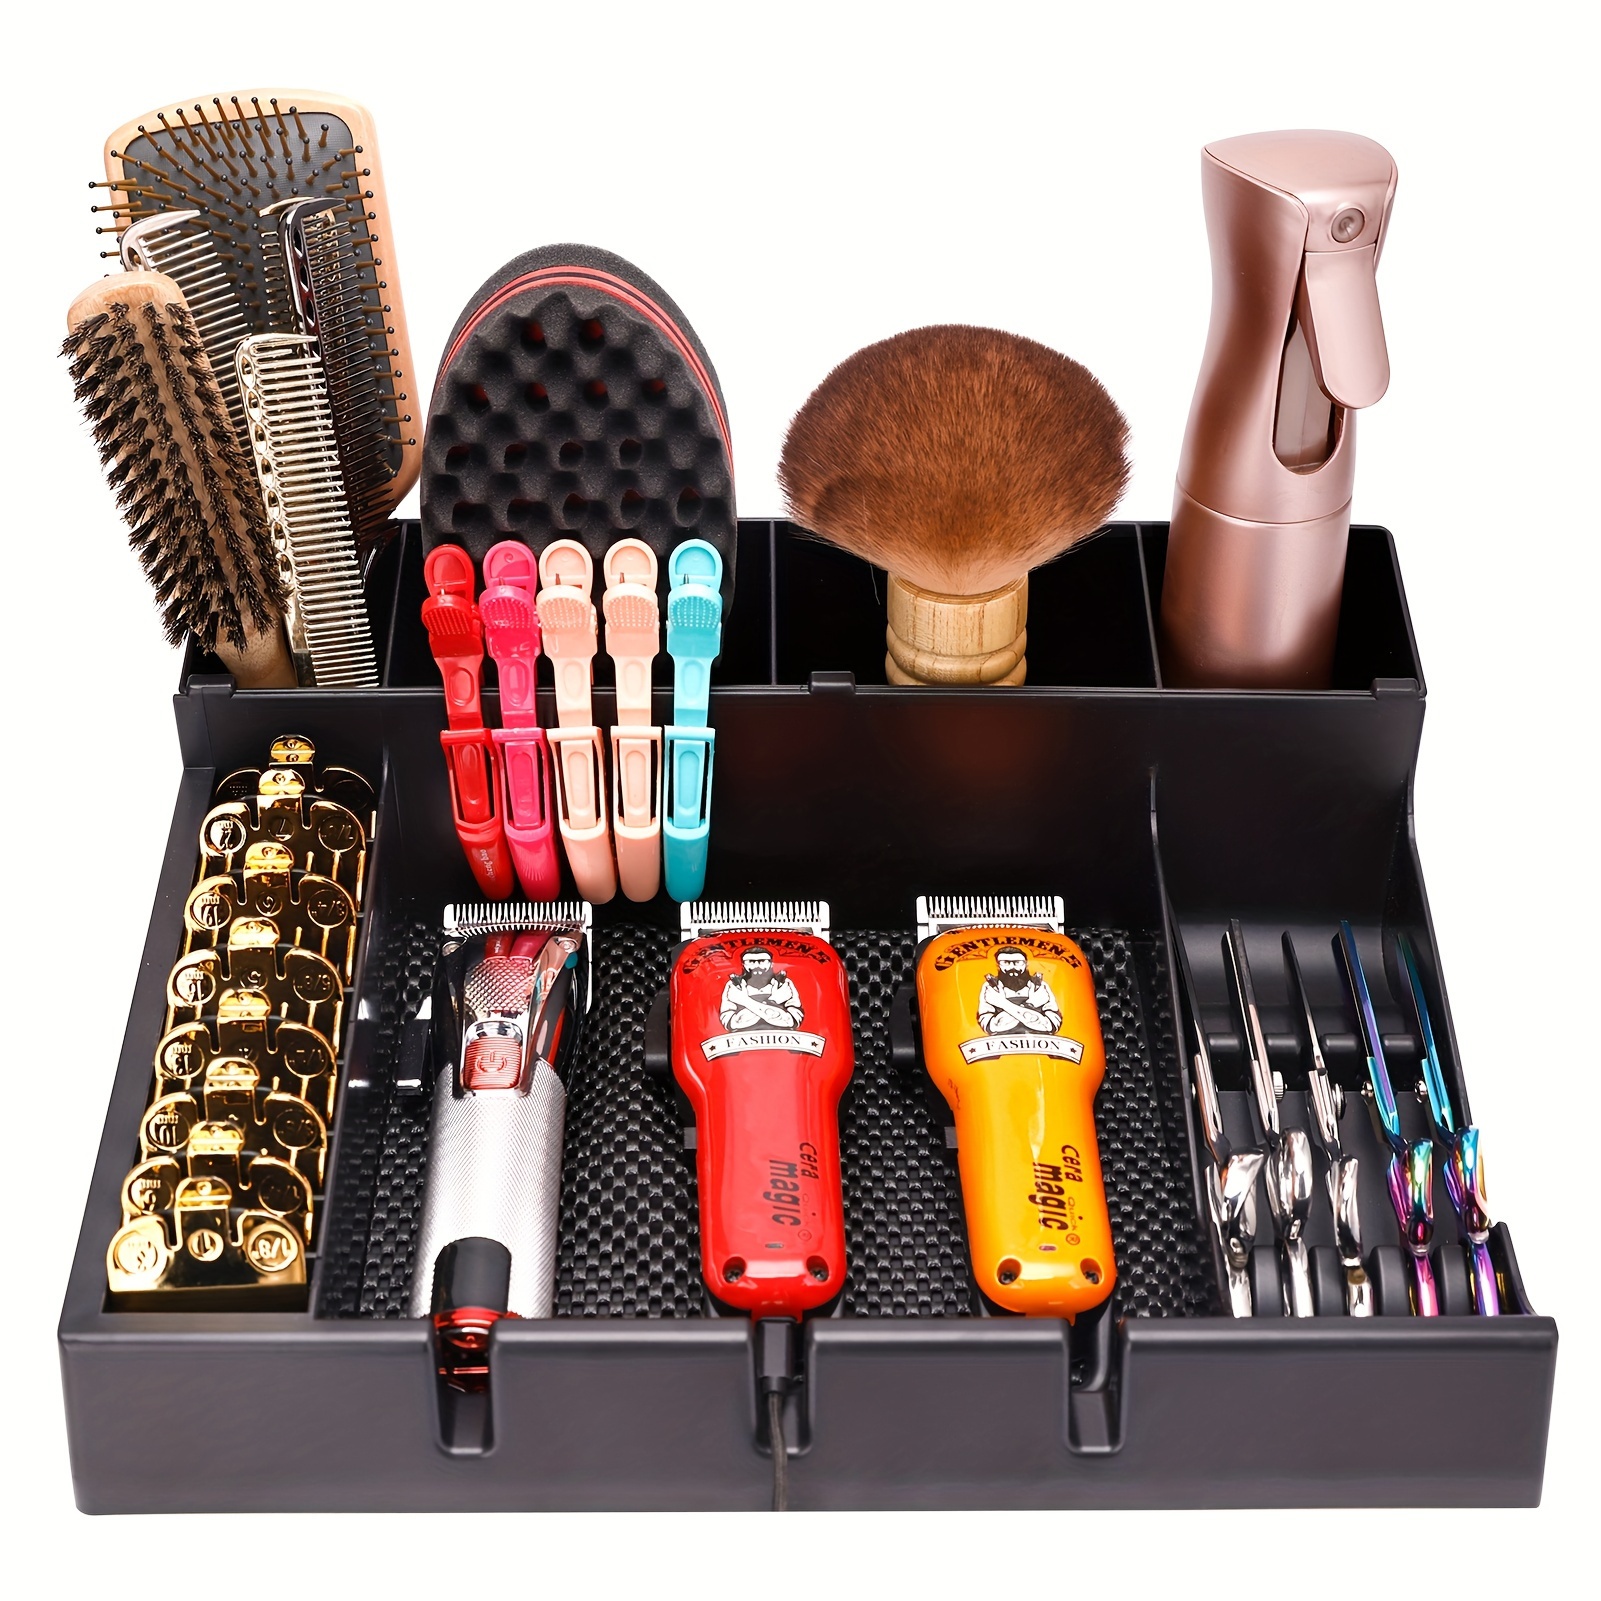 

Professional Hairdressing Tray, Hairdressing Tools, Scissors And Comb Storage Box, Black With Multiple Compartments, Scissor And Beard Brush Display Stand, Desktop Professional Tools For Hair Salon